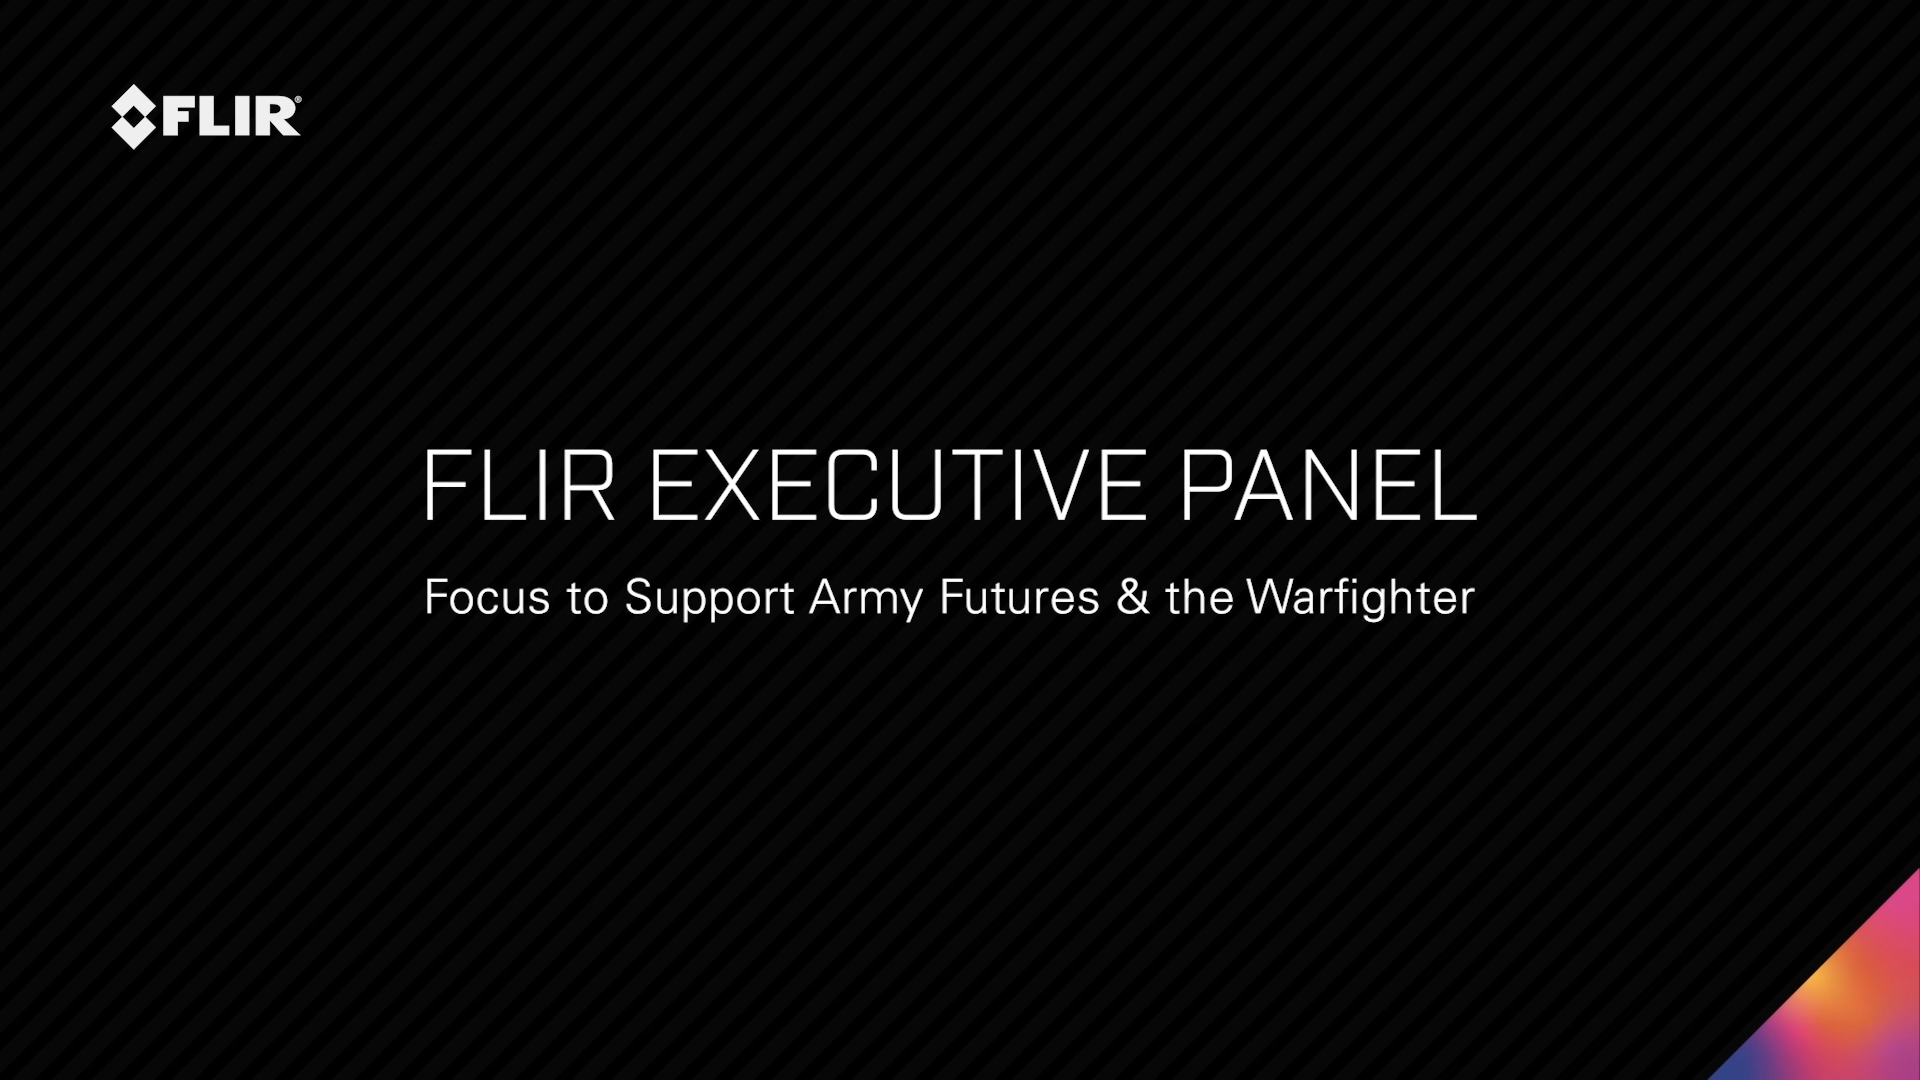 FLIR Executive Panel: Focus to Support Army Futures and the Warfighter